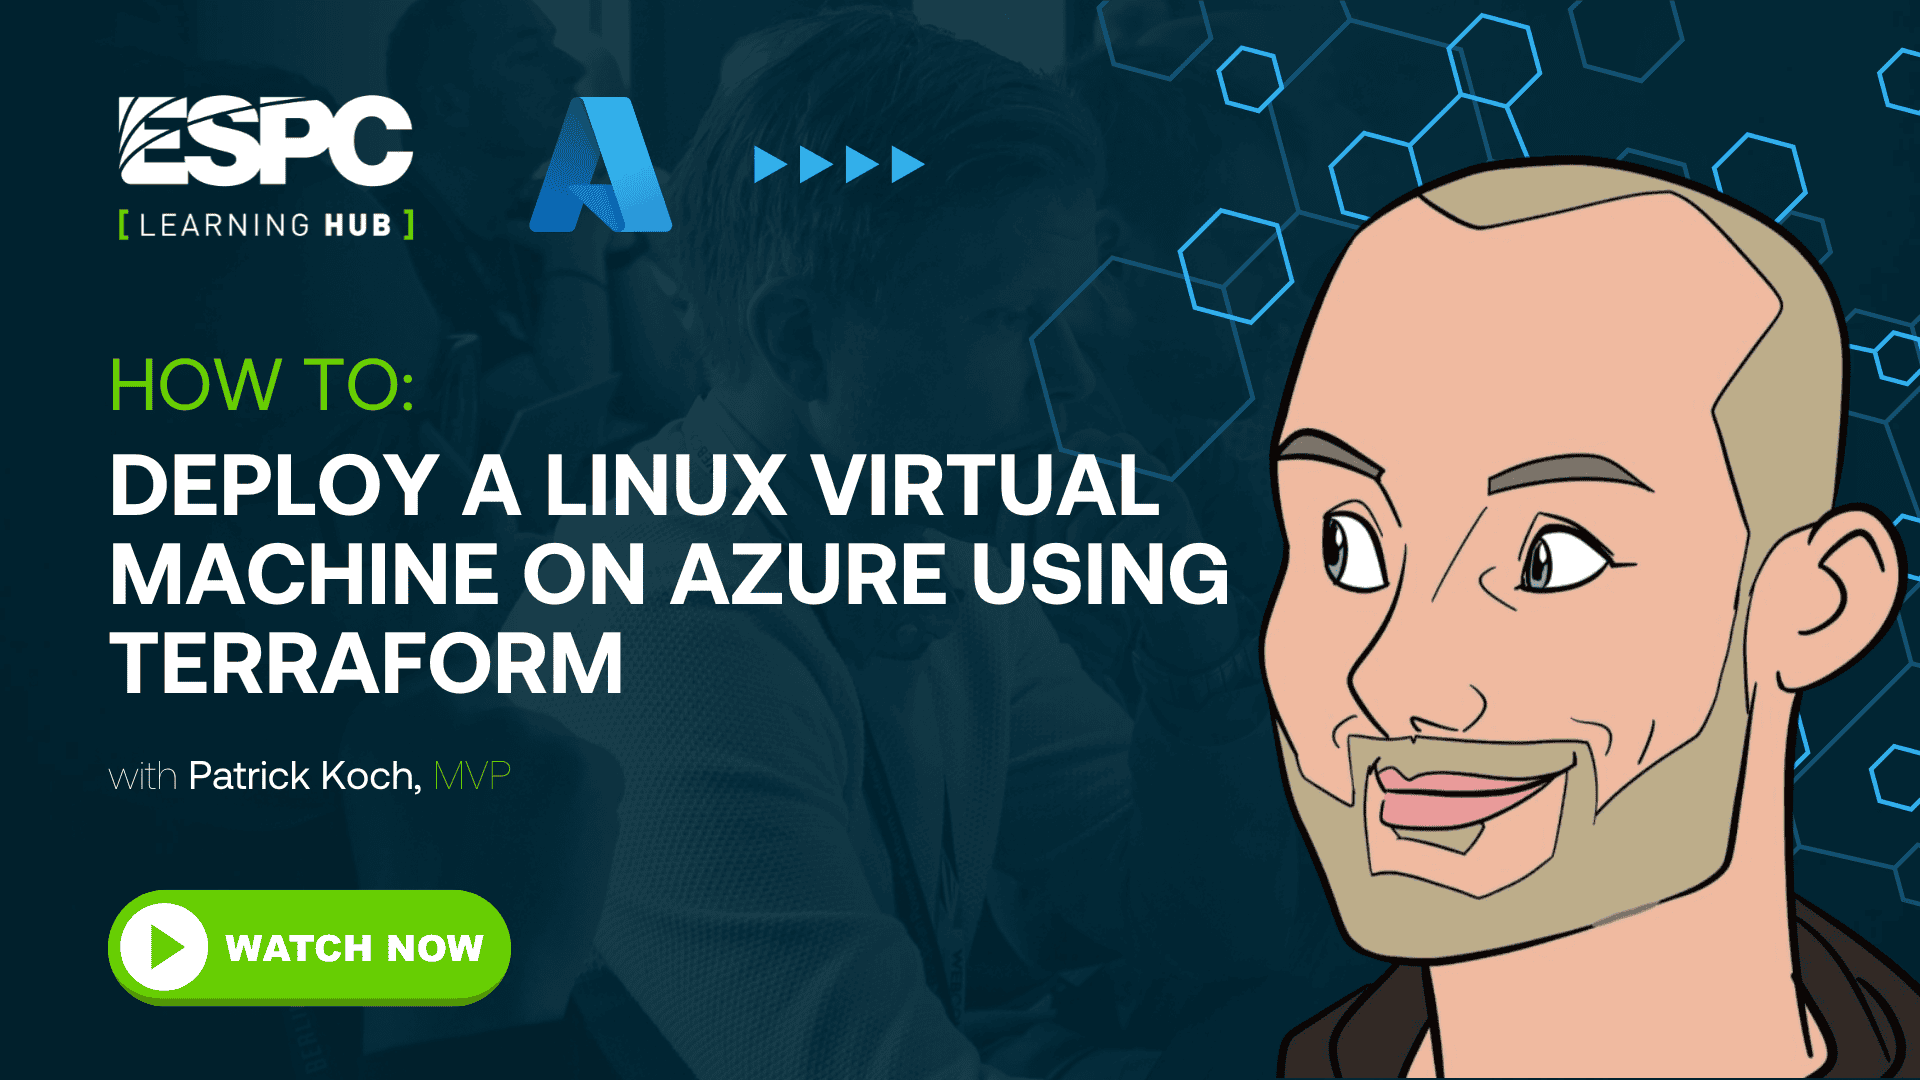 How To Deploy a Linux Virtual Machine on Azure Using Terraform